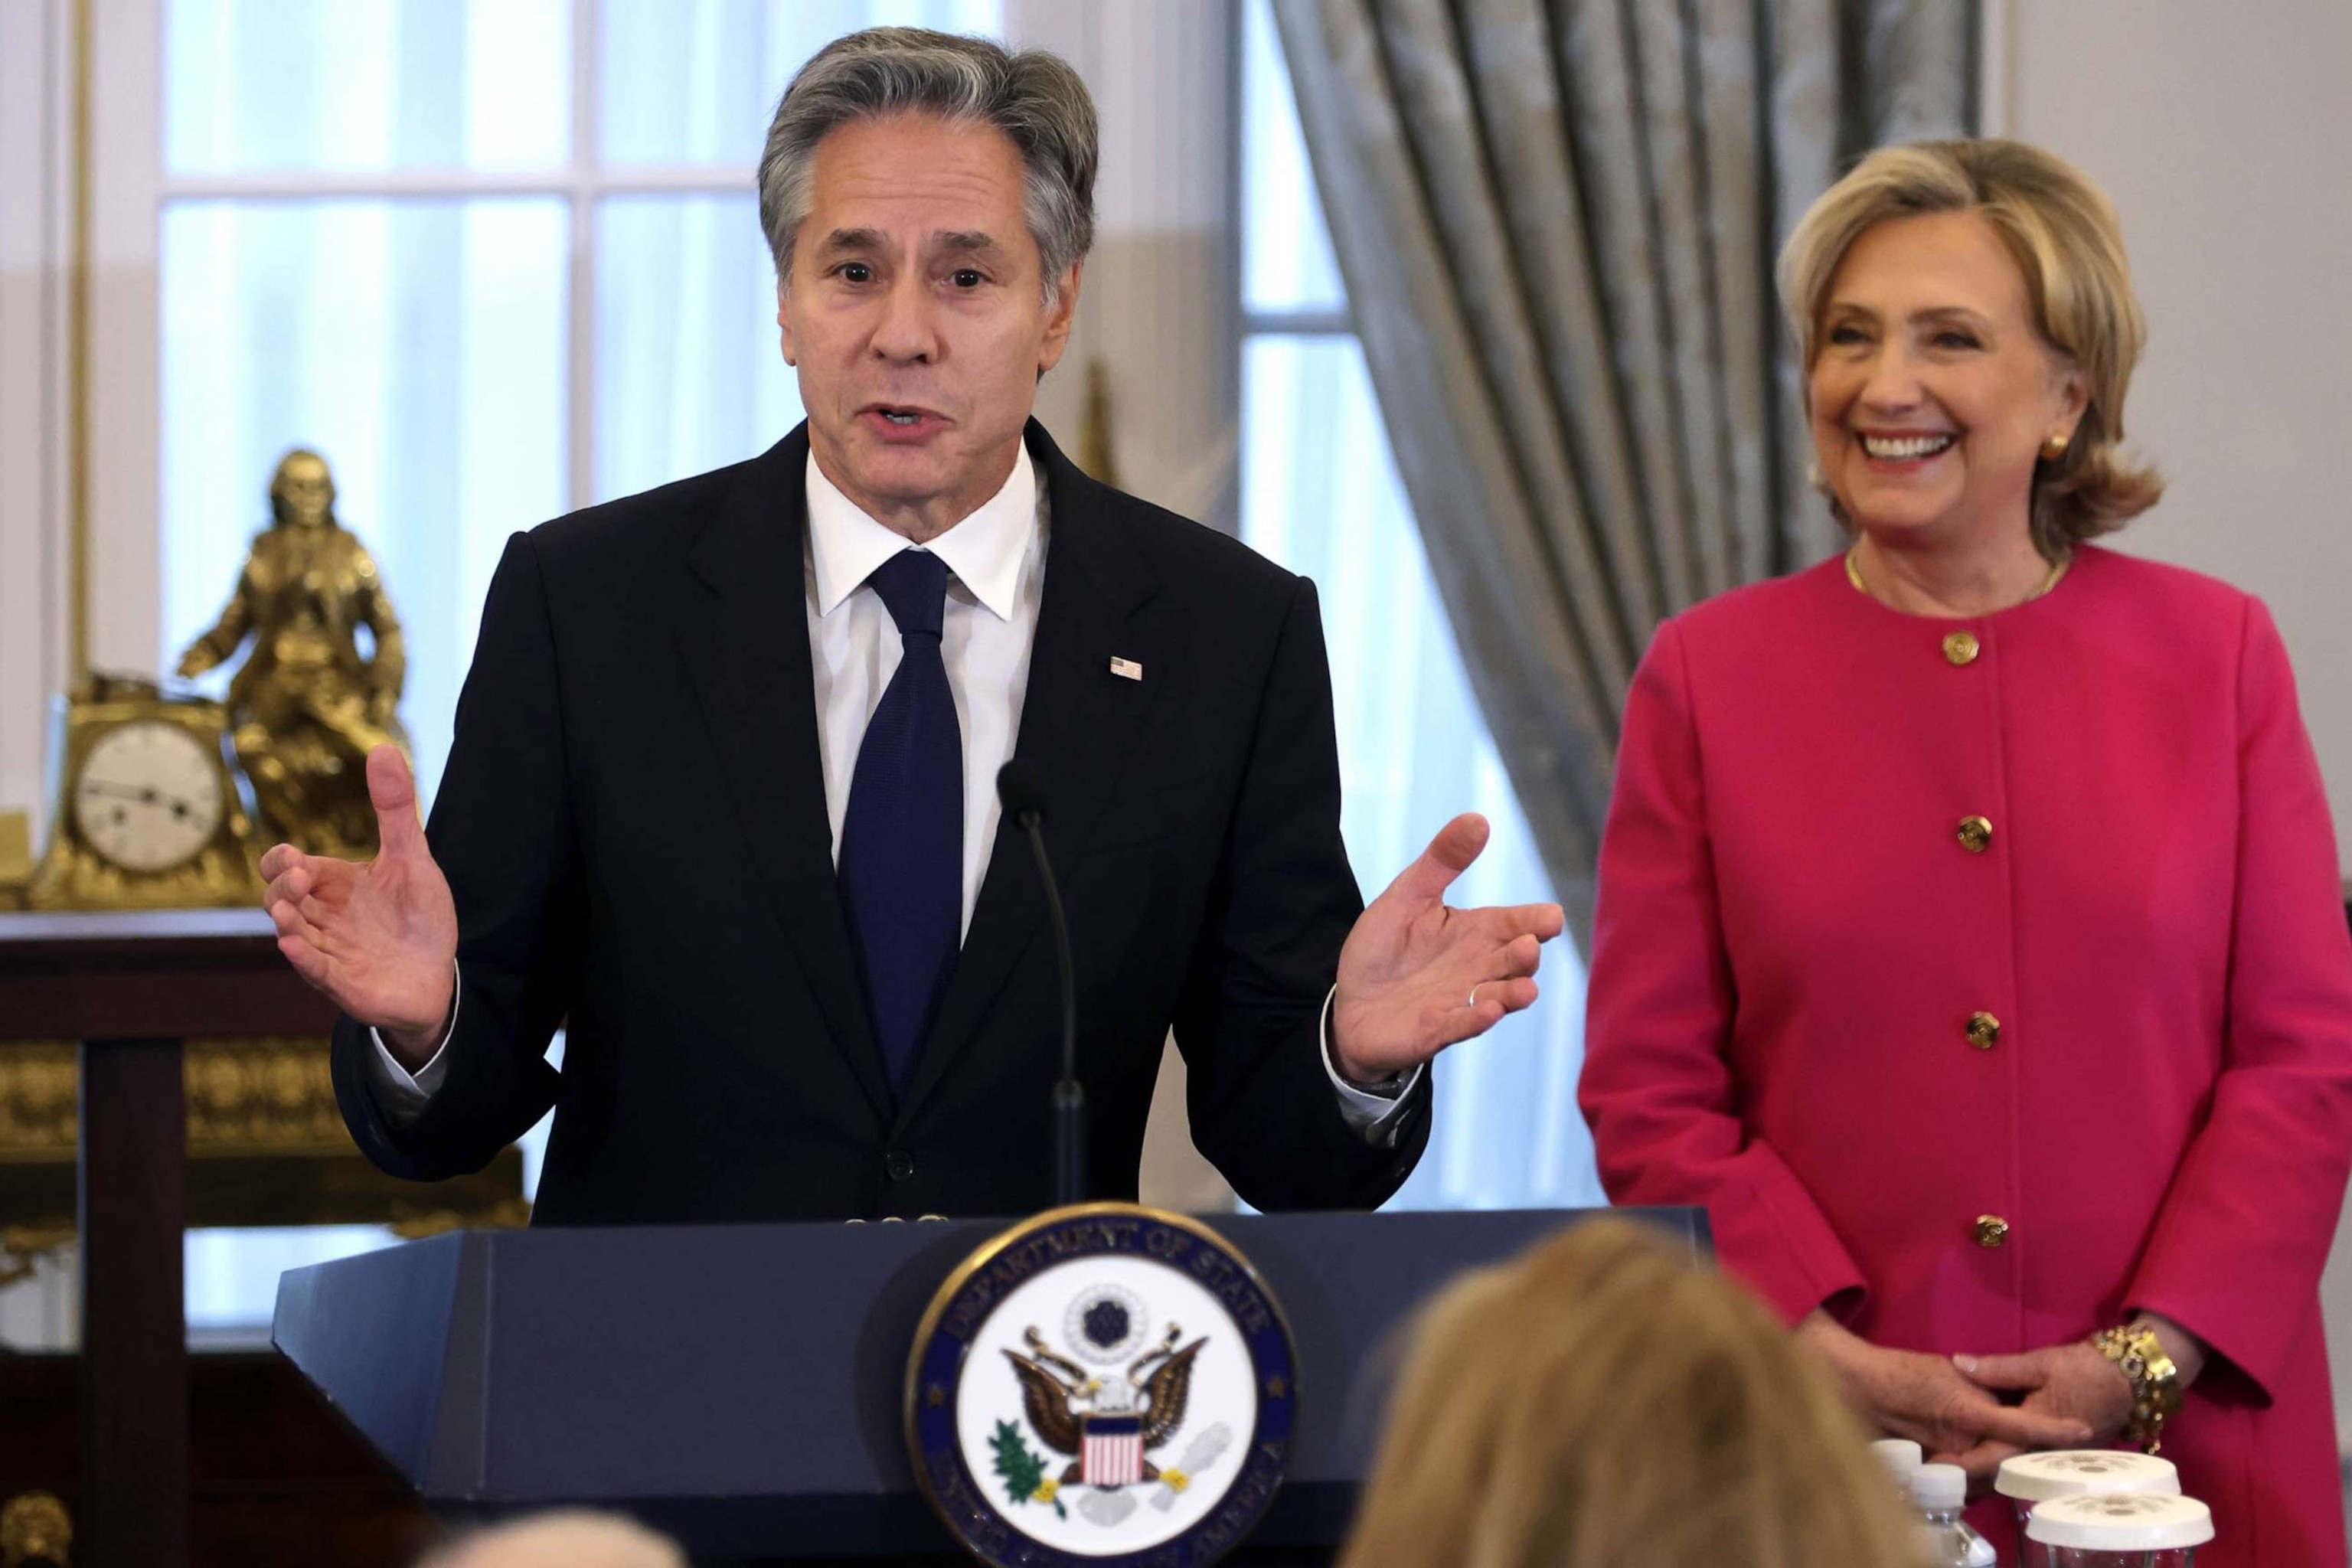 PHOTO: Secretary of State Antony Blinken speaks as former Secretary of State Hillary Clinton listens during an unveiling of her portrait at the State Department, Sept. 26, 2023 in Washington, DC.